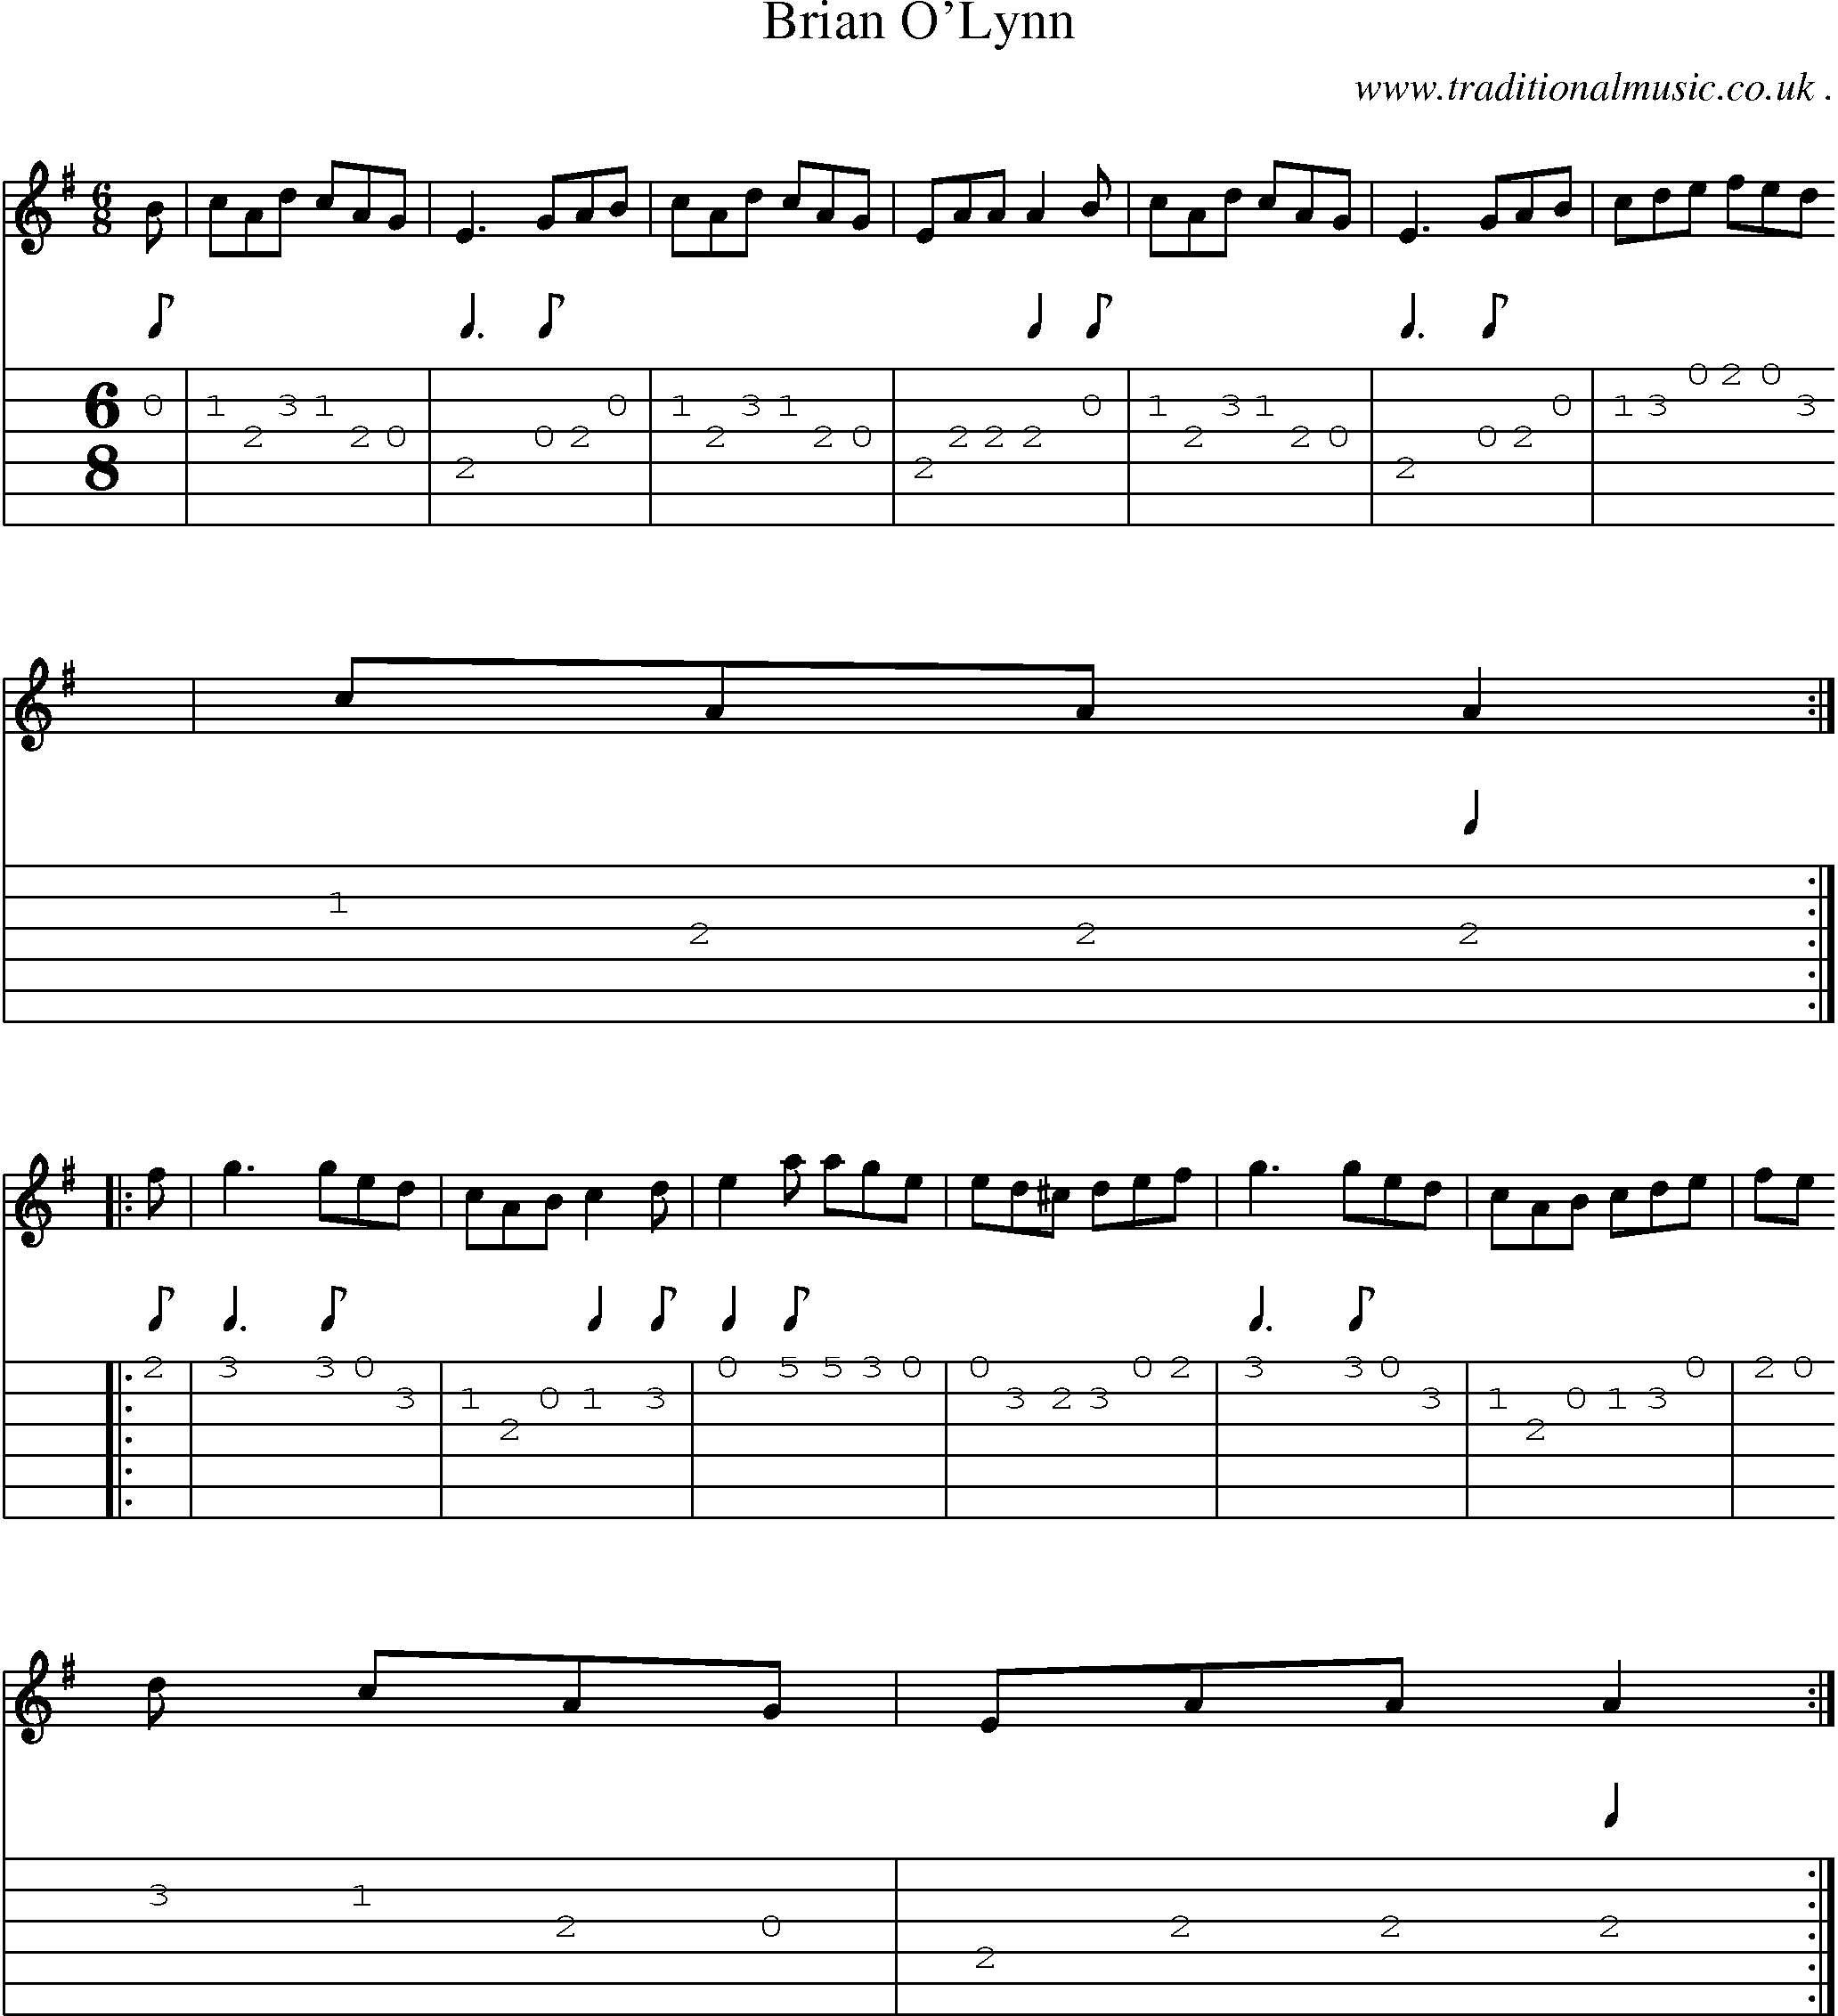 Sheet-Music and Guitar Tabs for Brian Olynn